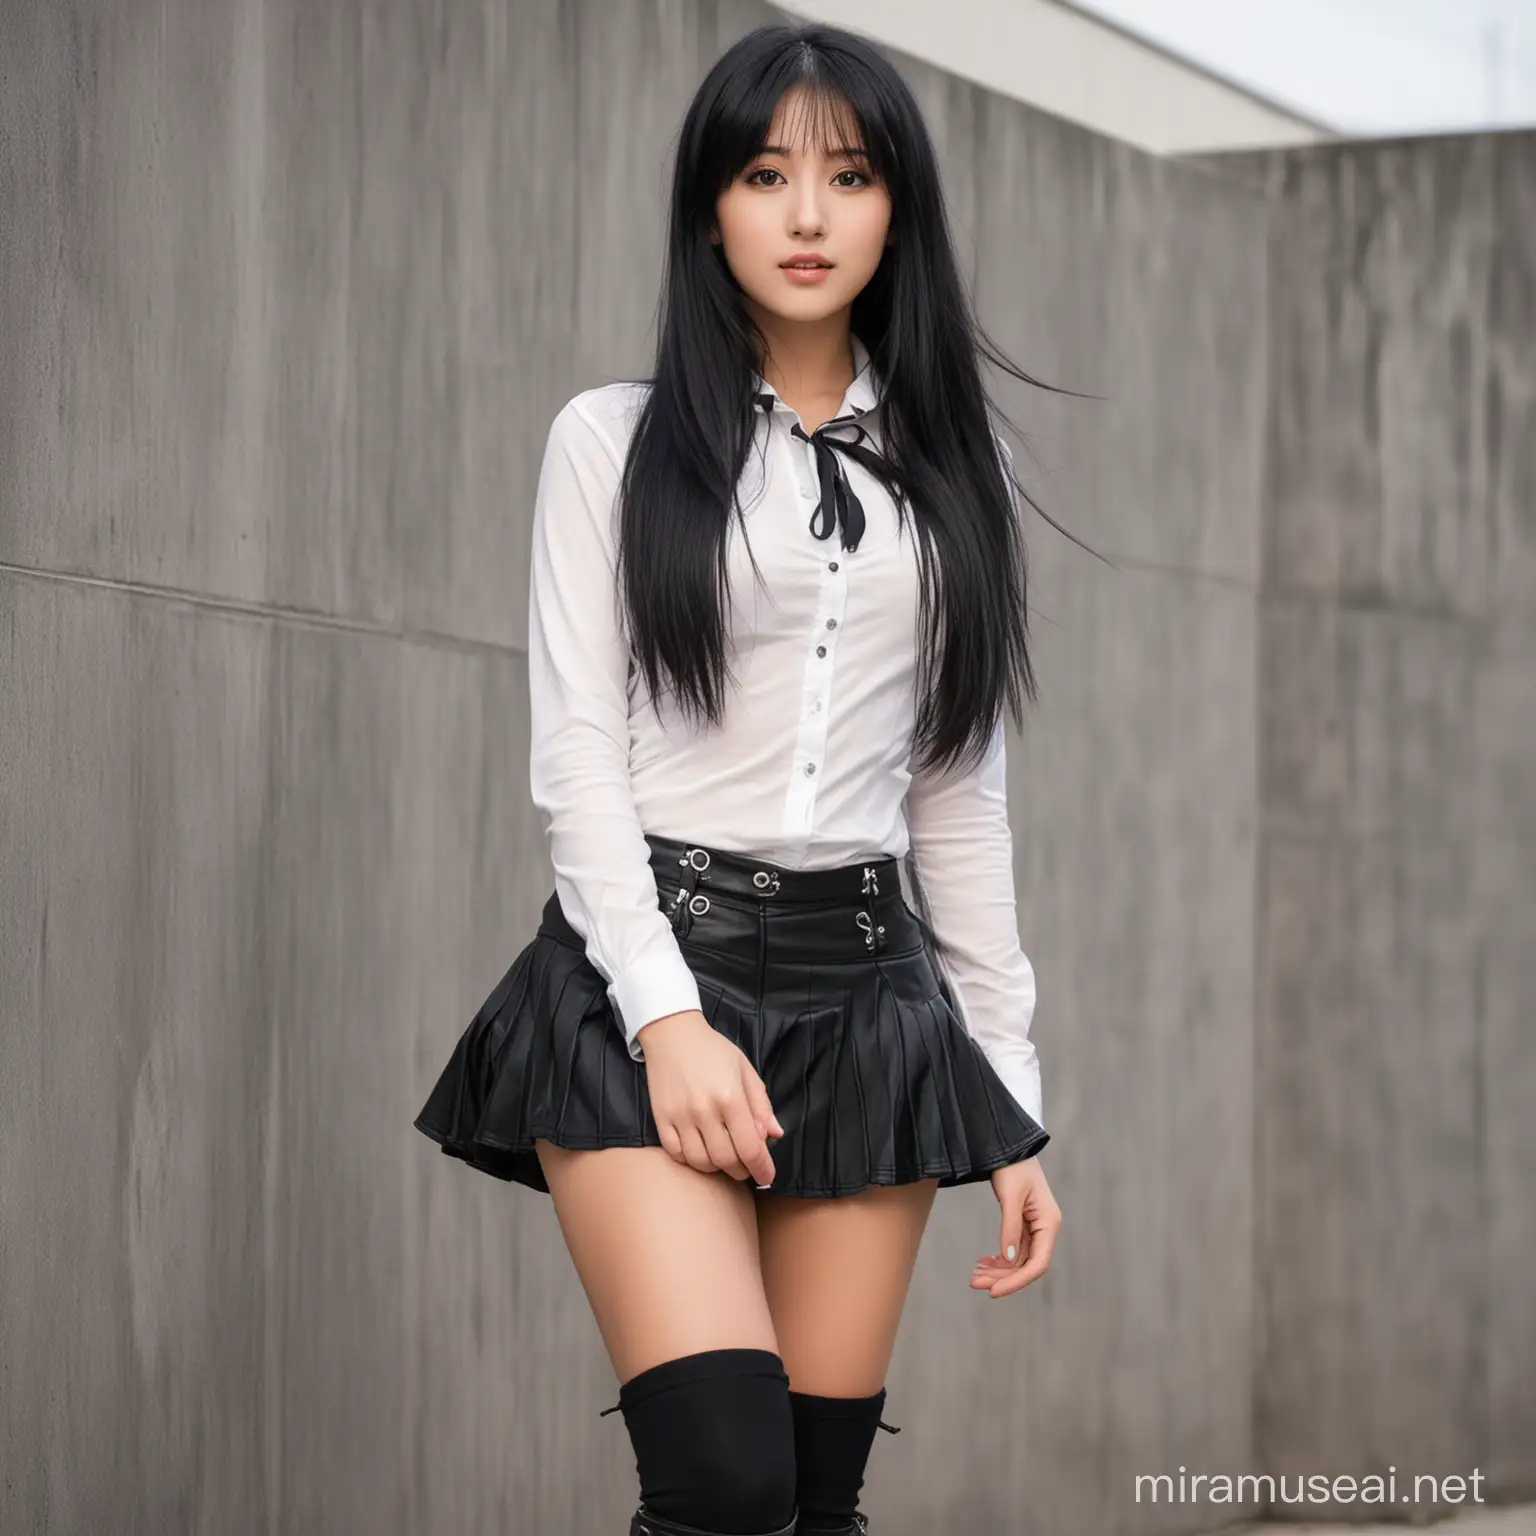 a beautiful girl with long black hair, wearing mini-skirts and boots, pretty charming